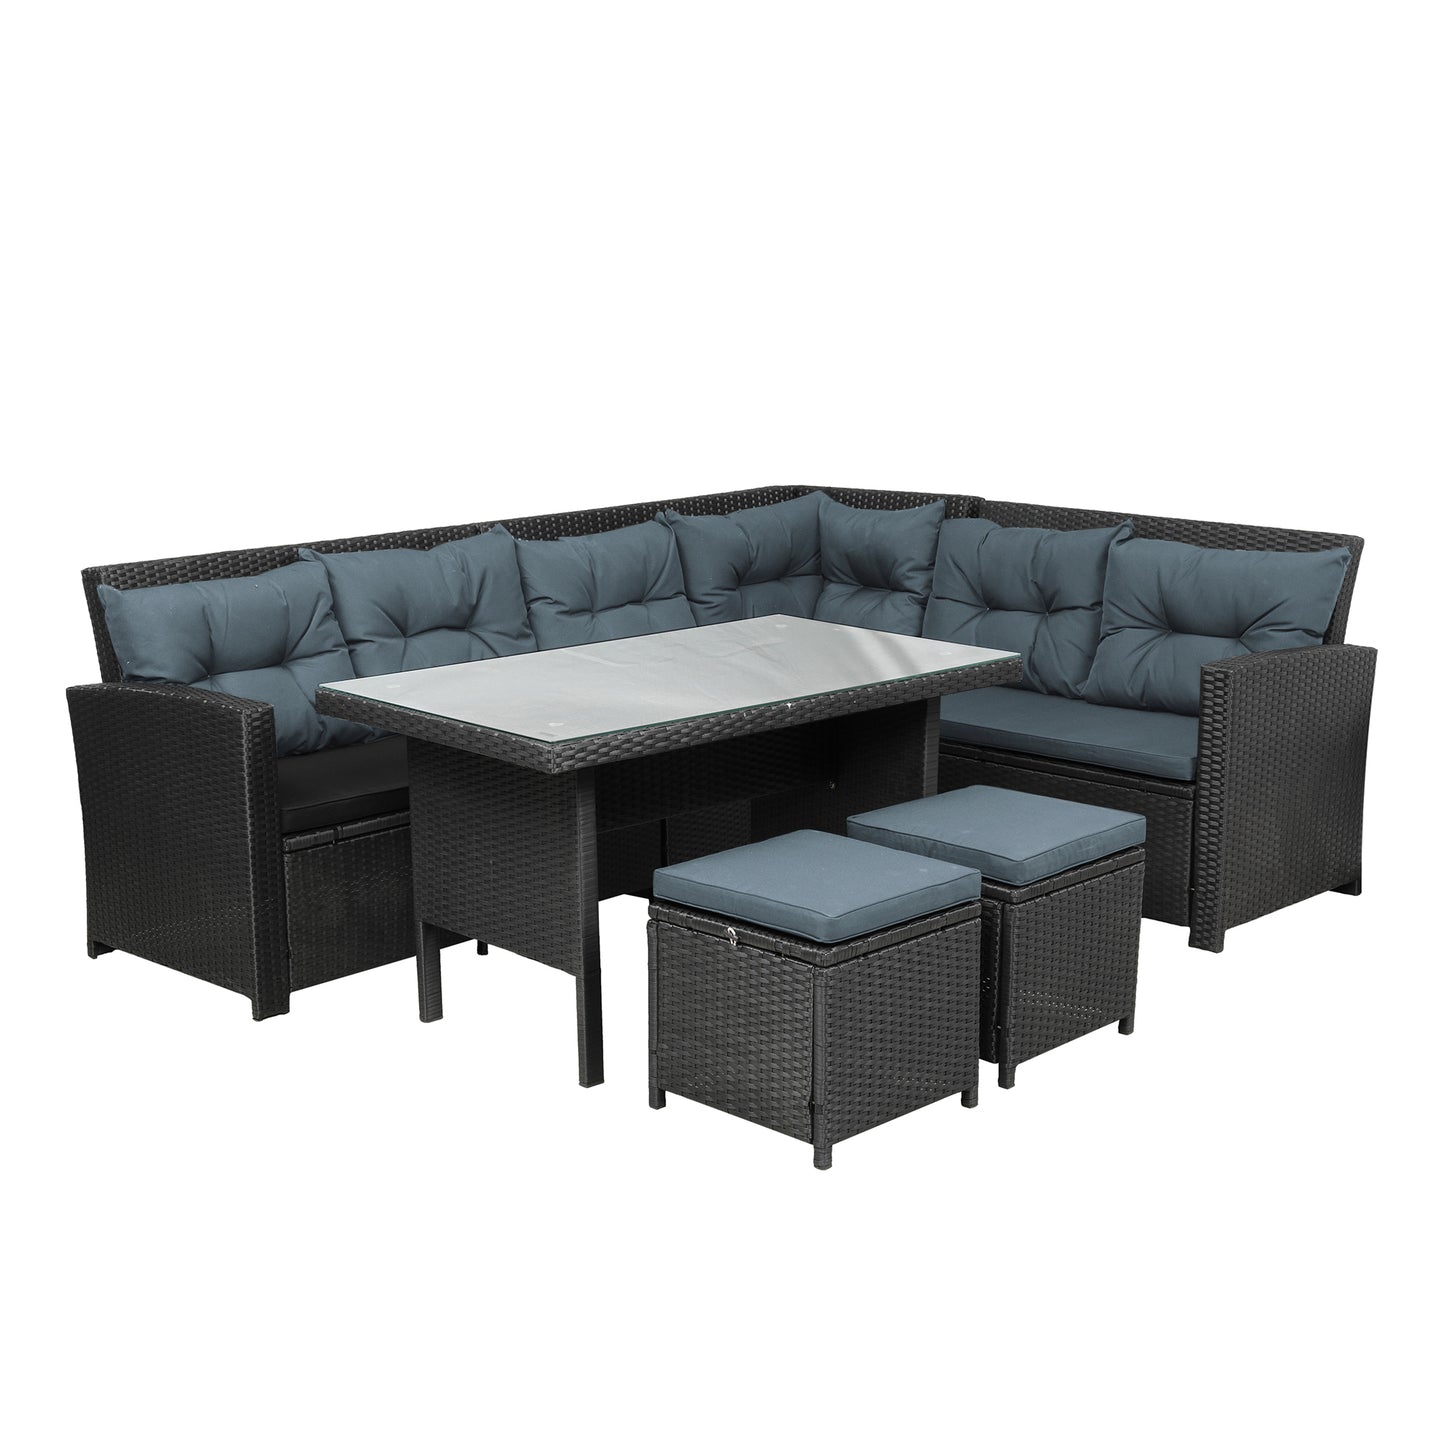 6PC Outdoor Sectional Dining Set Black